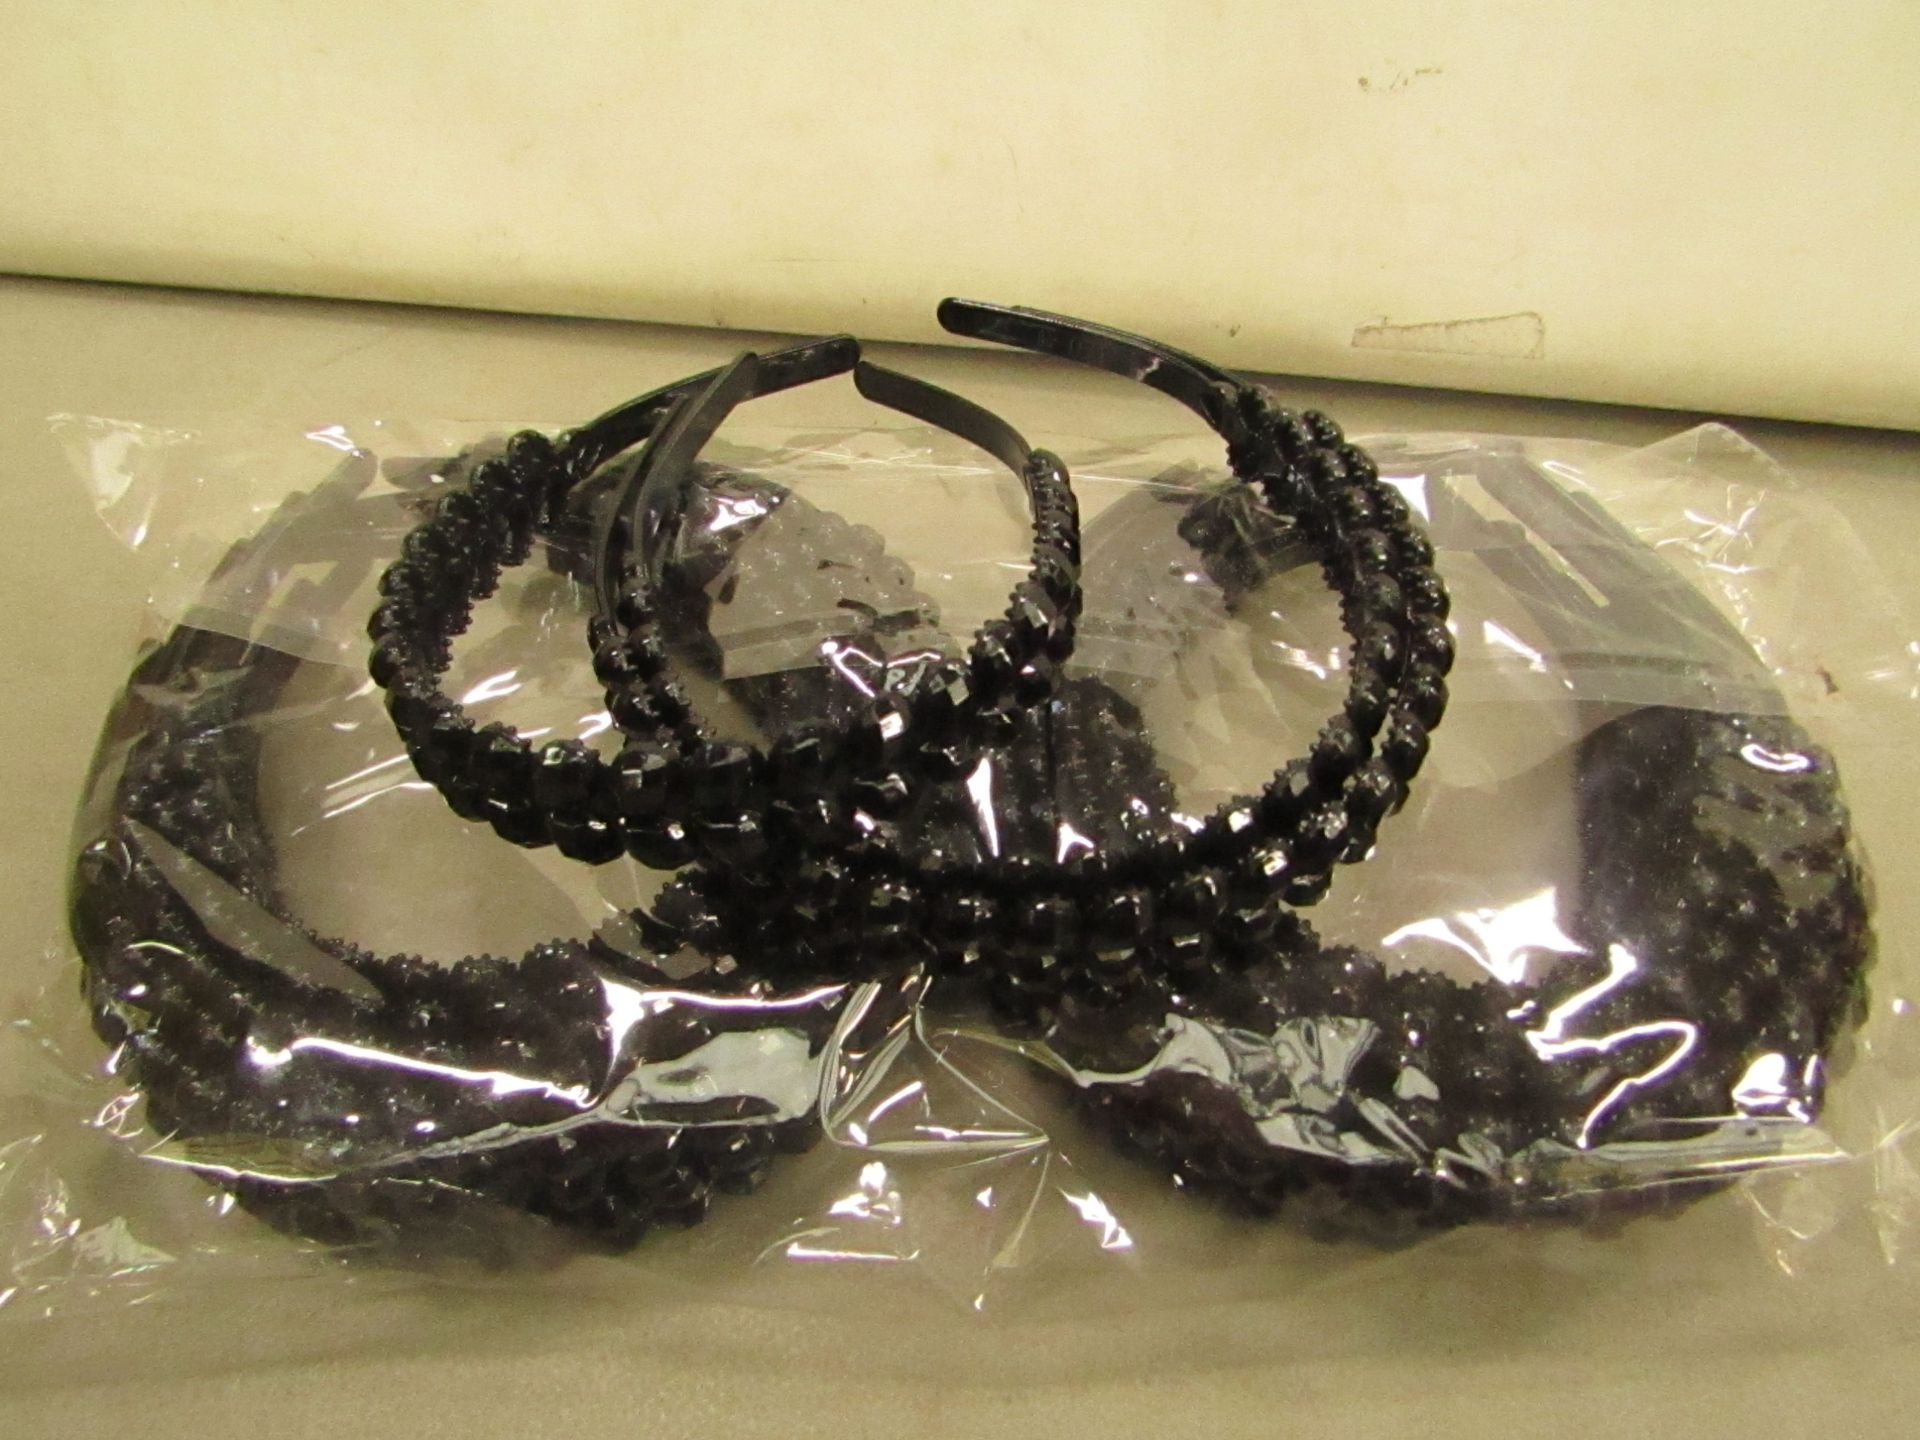 20 x Black Bead Effect Comb Headband Similar Product RRP £2.50 each @ Claire's Accessories New